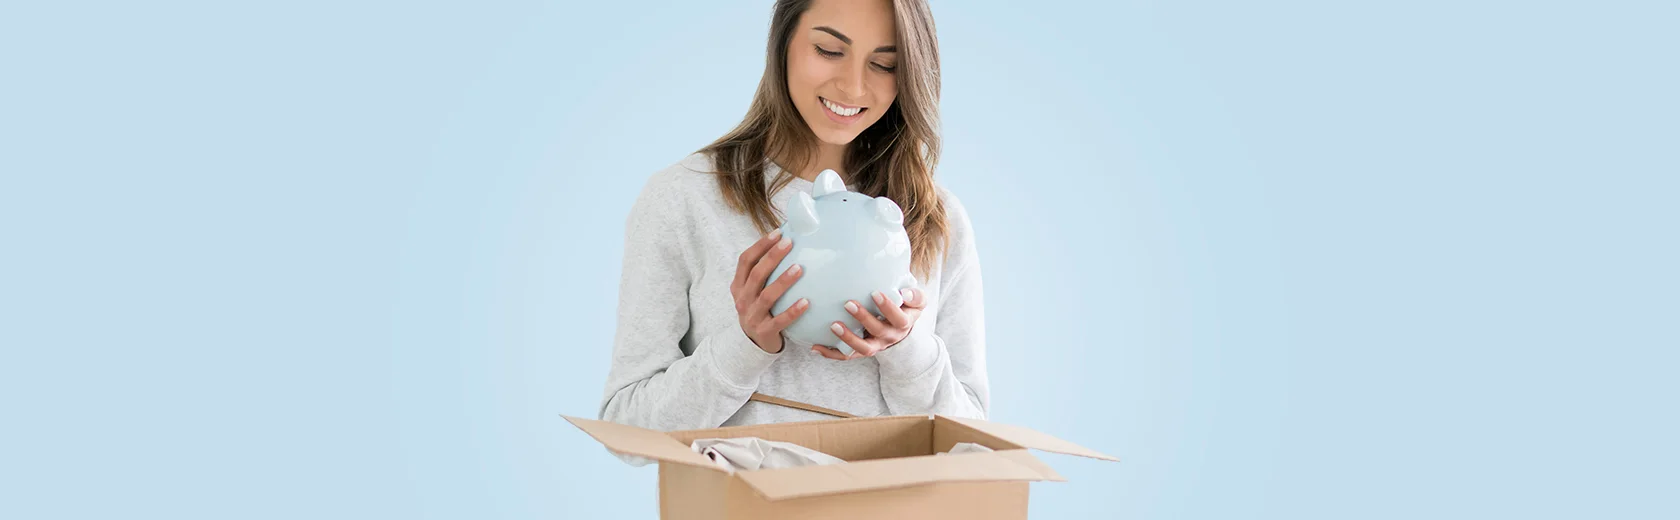 Woman taking piggy bank from parcel